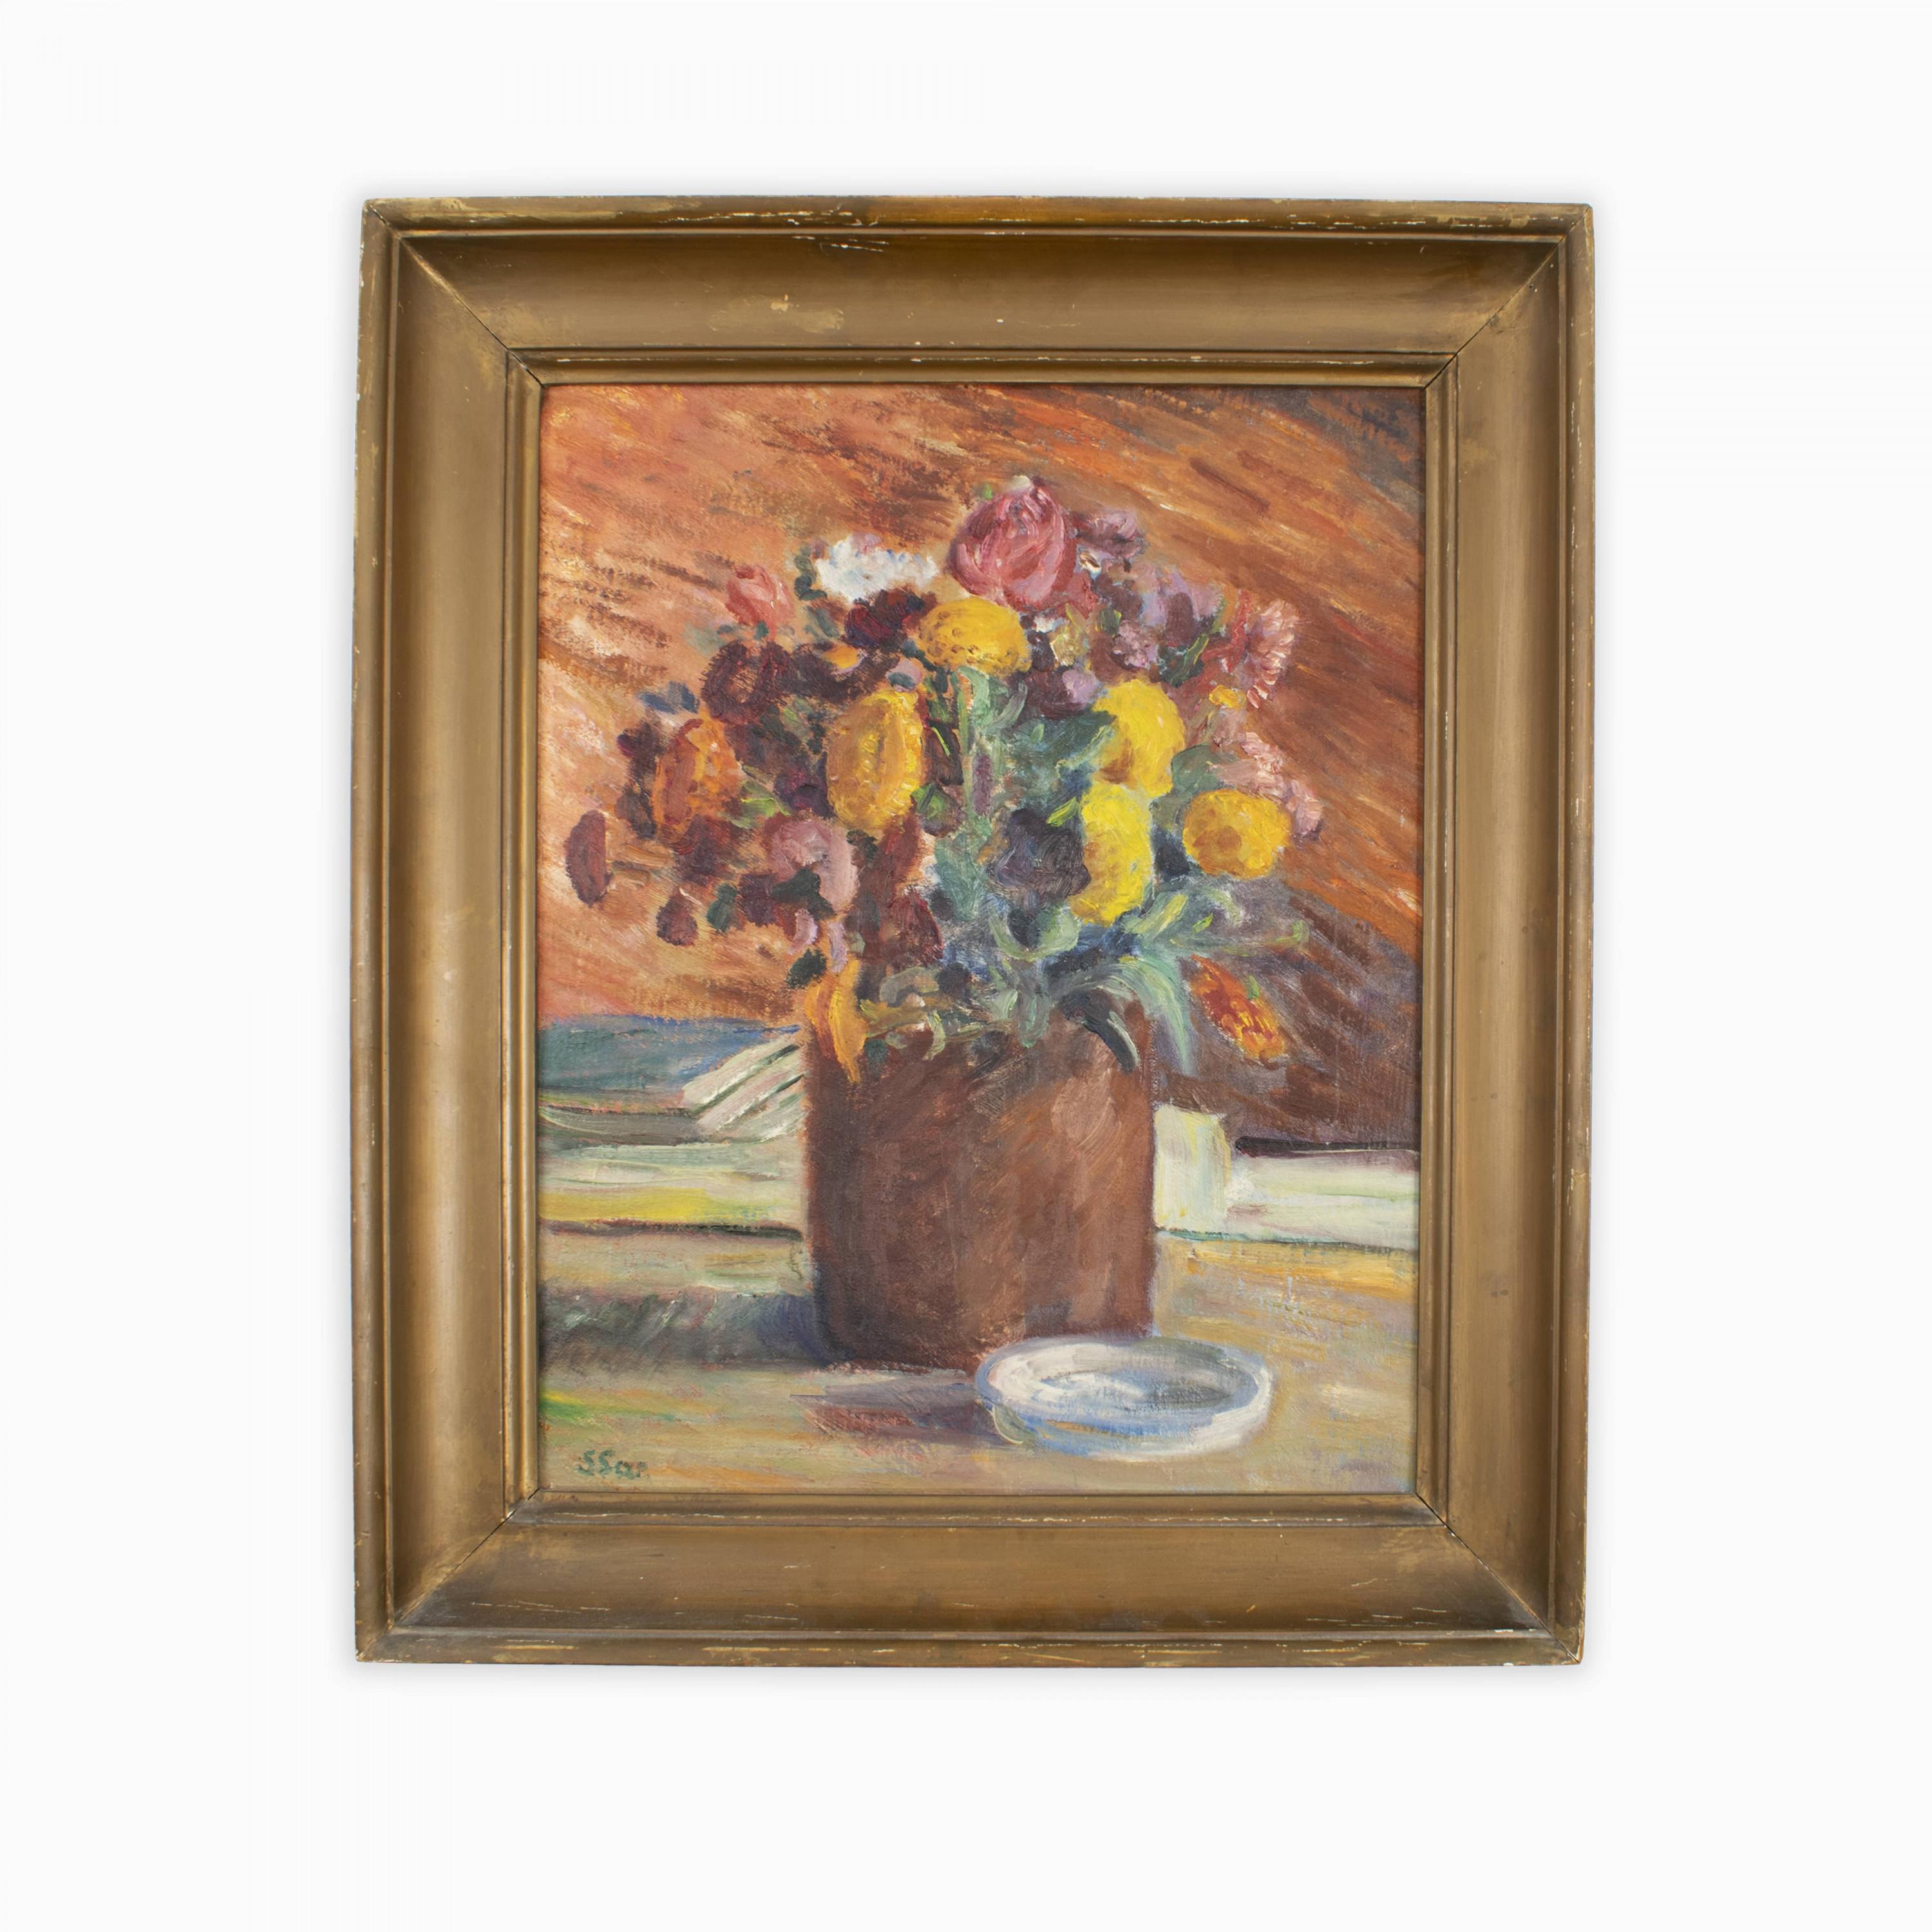 Sigurd Swane 1879 - 1973.
Arrangement with flowers.
Signed: SSW.
Sigurd Swane was a Danish painter and writer. He studied in Copenhagen at the Royal Danish Academy of Fine Arts. When he was in Paris in 1907, he was inspired by Impressionism and